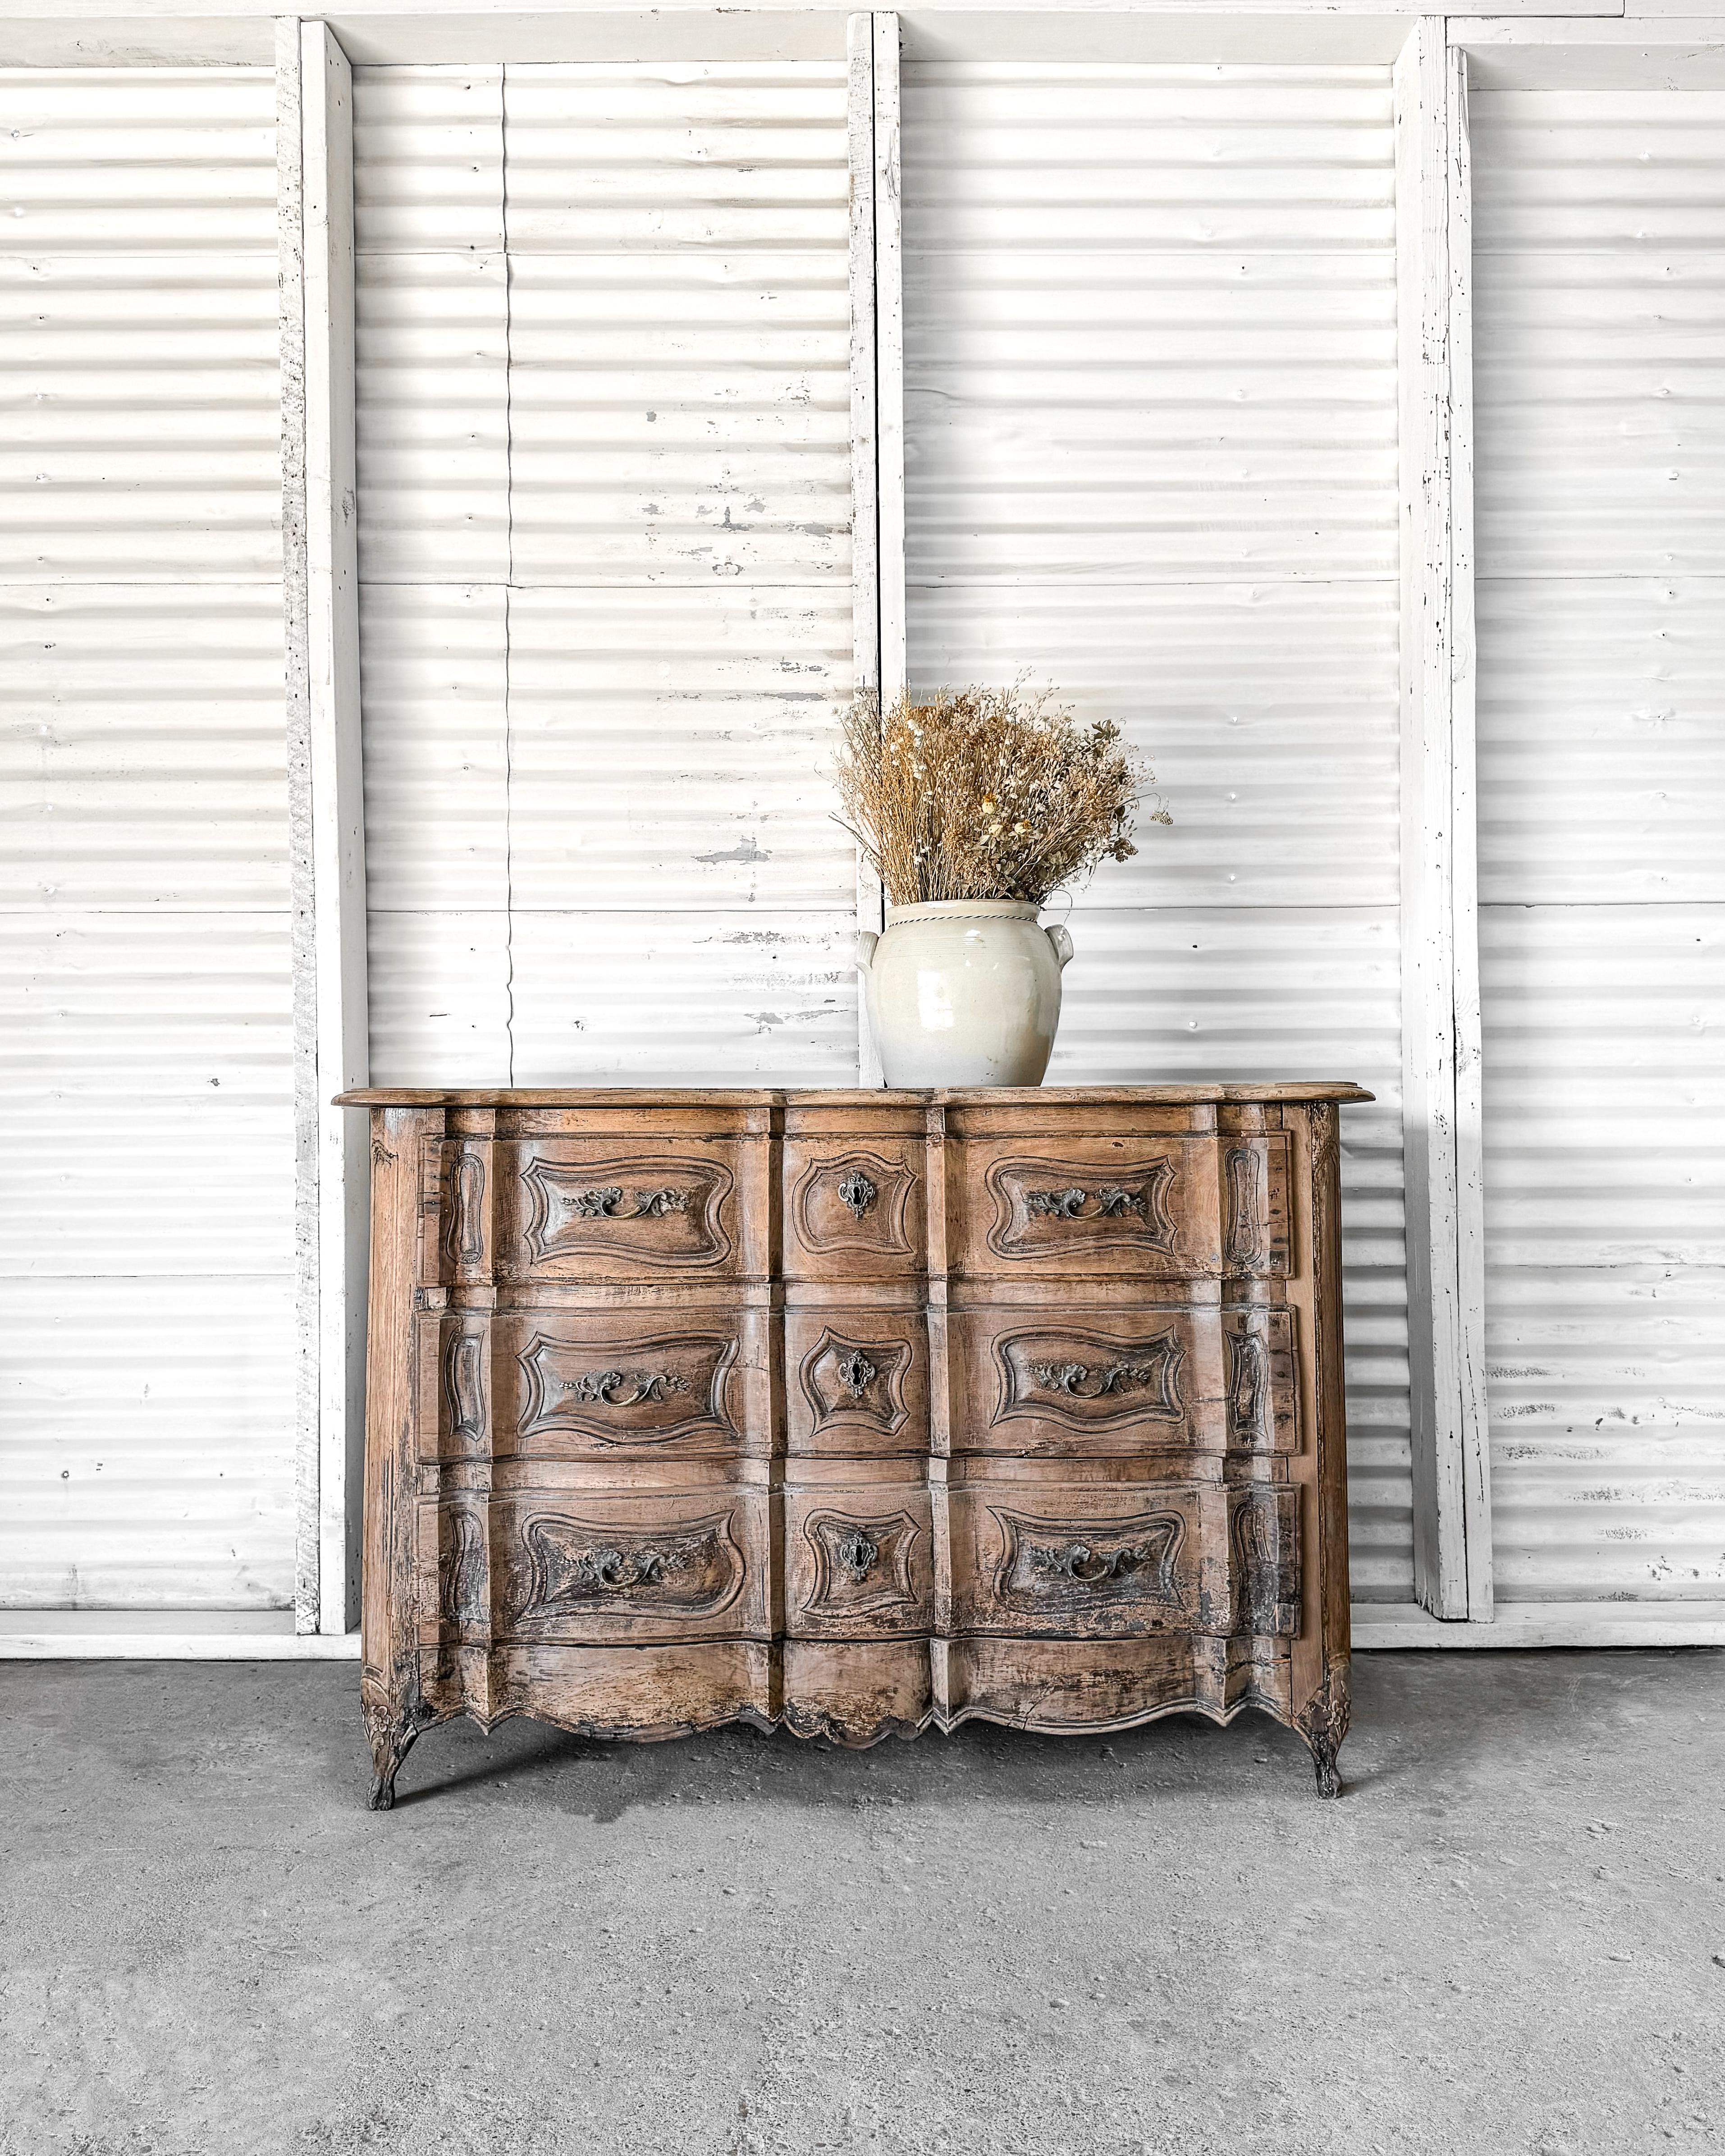 A beautiful French Provincial 3-drawer walnut commode with serpentine front and conforming molded edge 2-board top. Carved details at the shaped drawers, side paneling, and corner posts enhance the design. Original foliate brass hardware adorns the